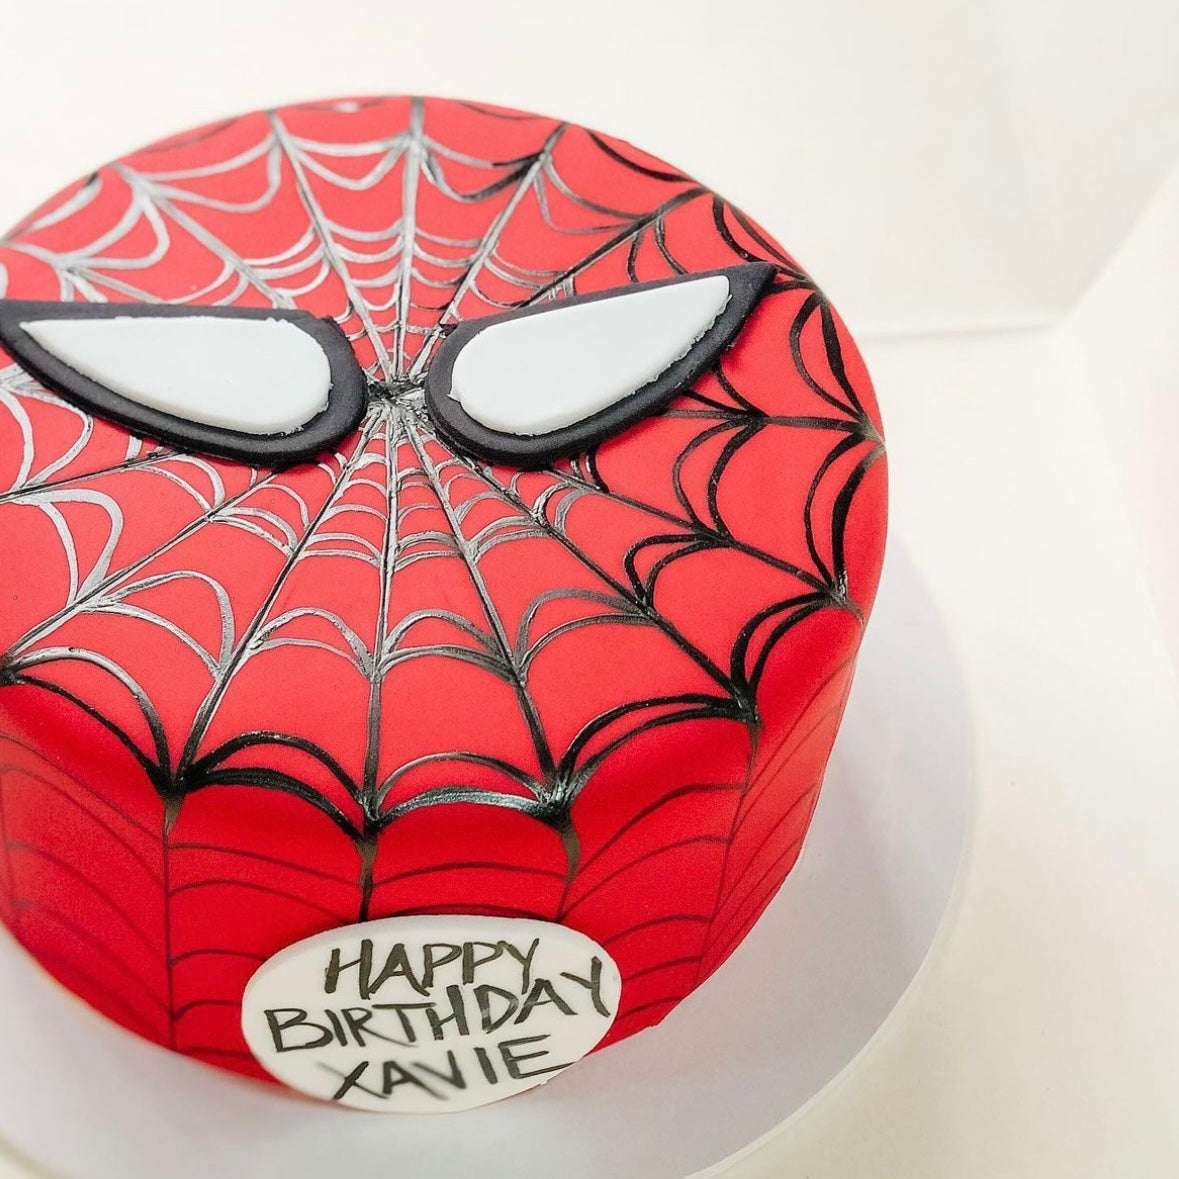 Buy Spiderman Cake Decorations Online In India - Etsy India